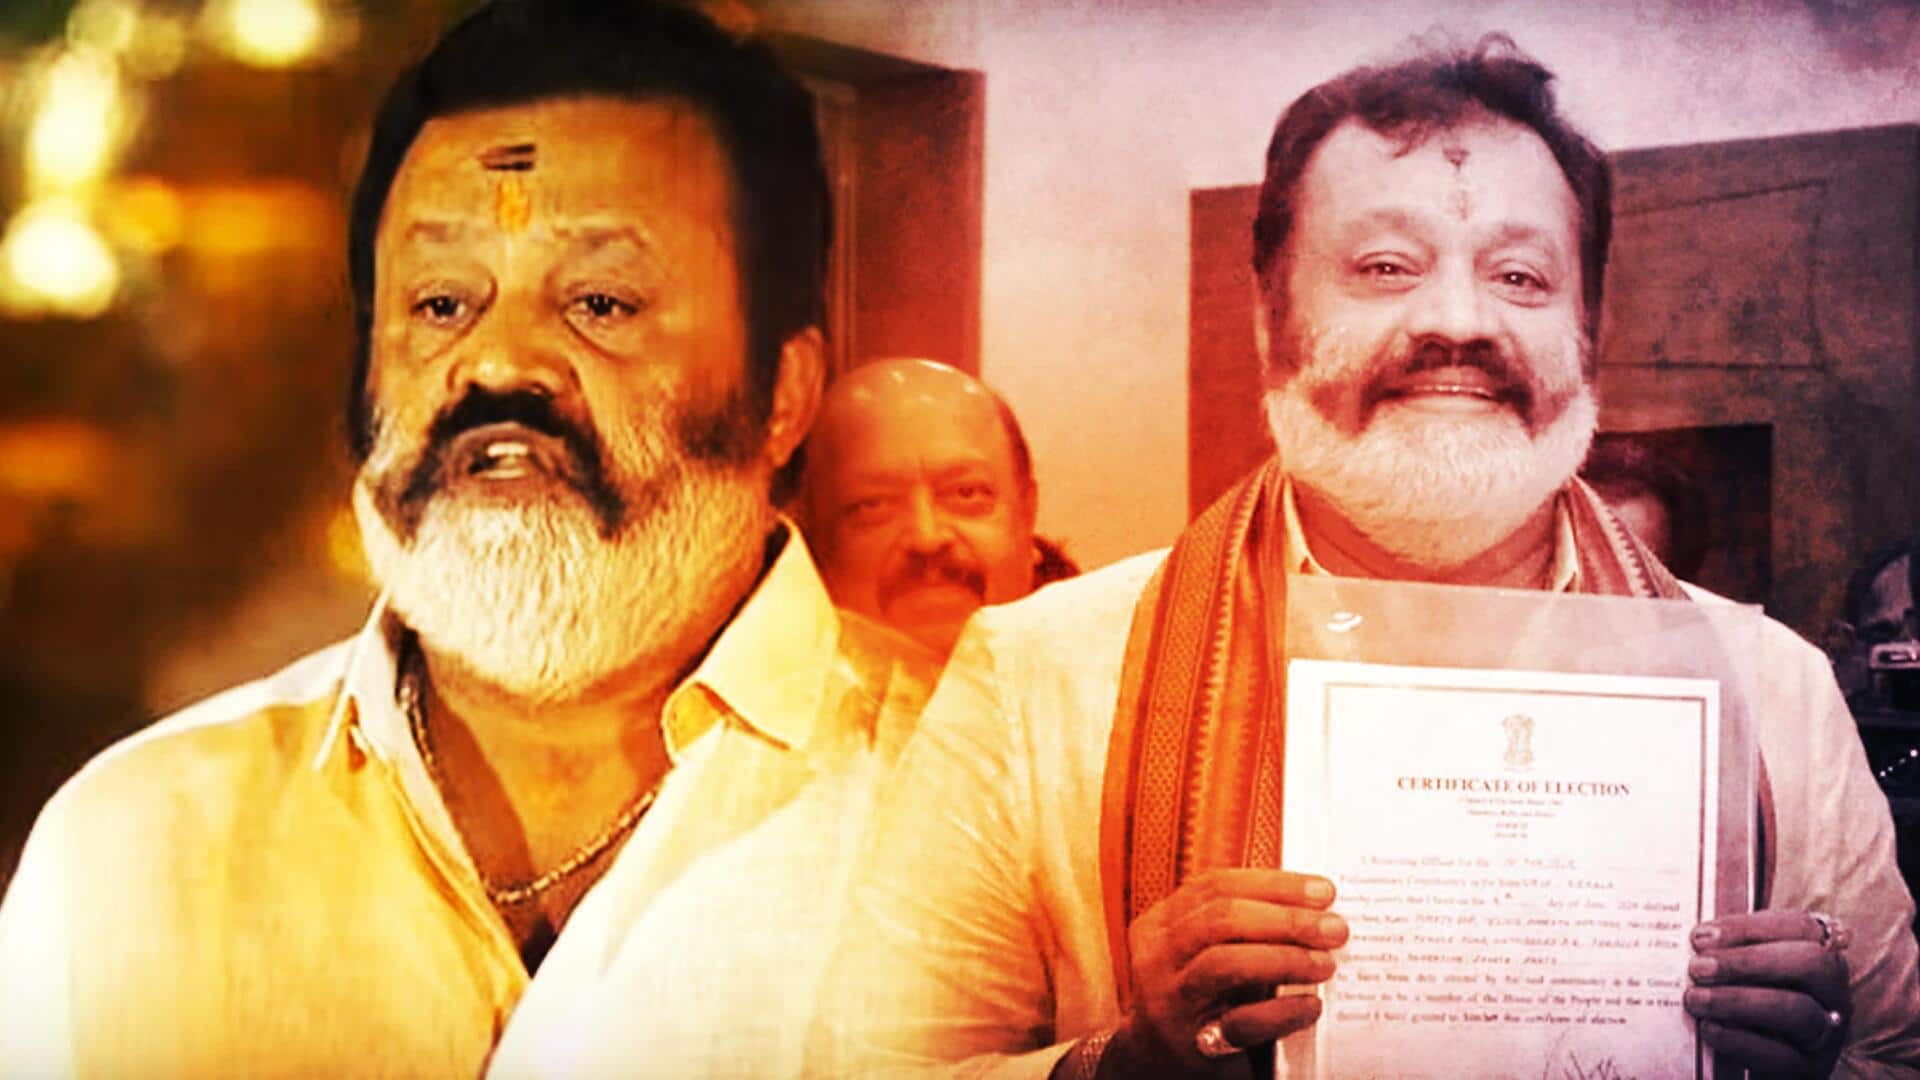 Actor-MP Suresh Gopi relinquishing ministerial role for films? His response 